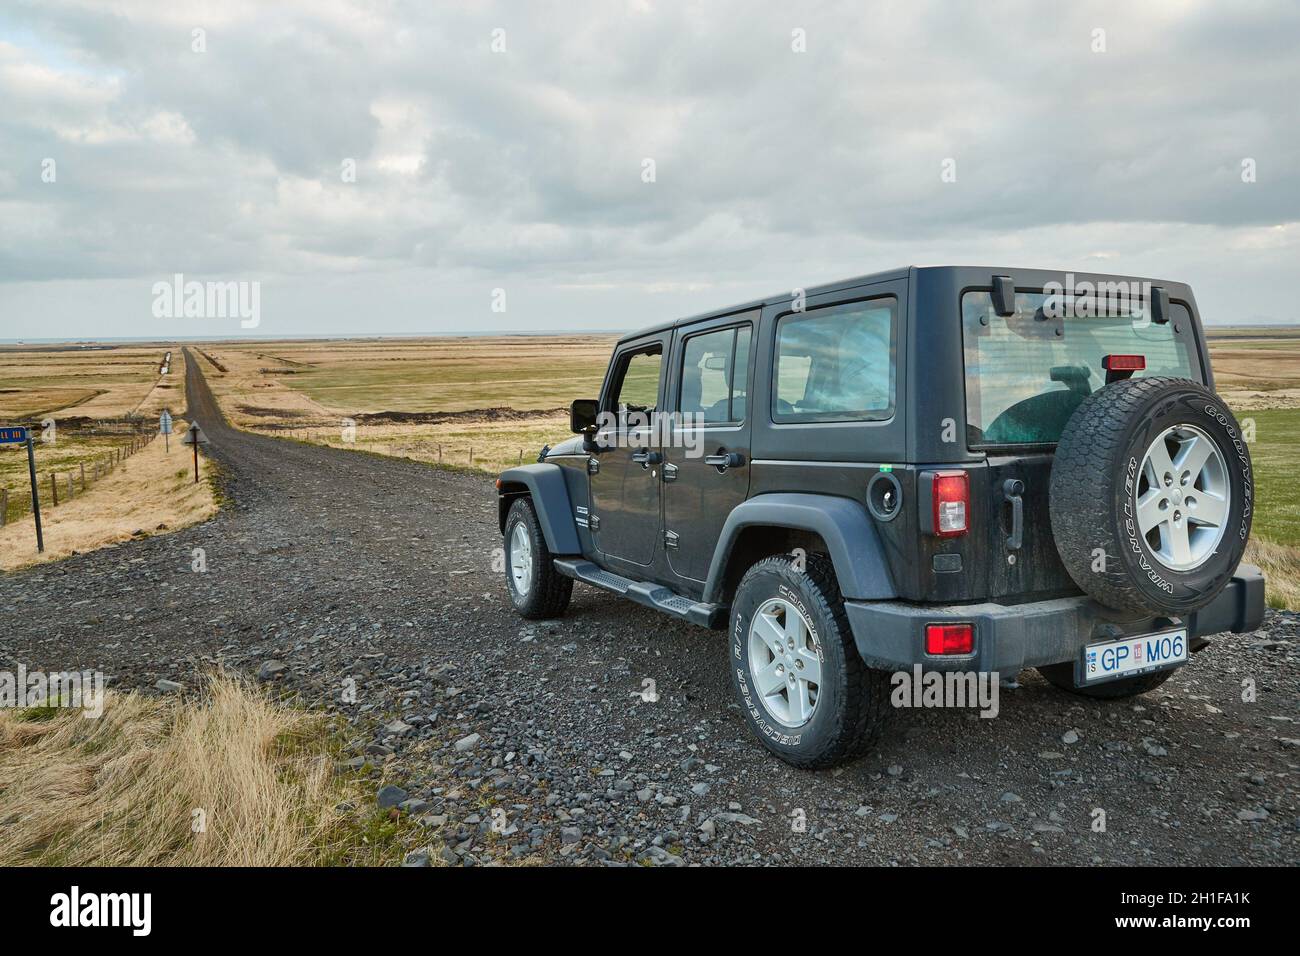 VIK, ICELAND - MAY 03, 2018: Jeep Wrangler Unlimited Sport four wheel drive  vehicle being used on terrain driving in Iceland, wild landscape Stock  Photo - Alamy